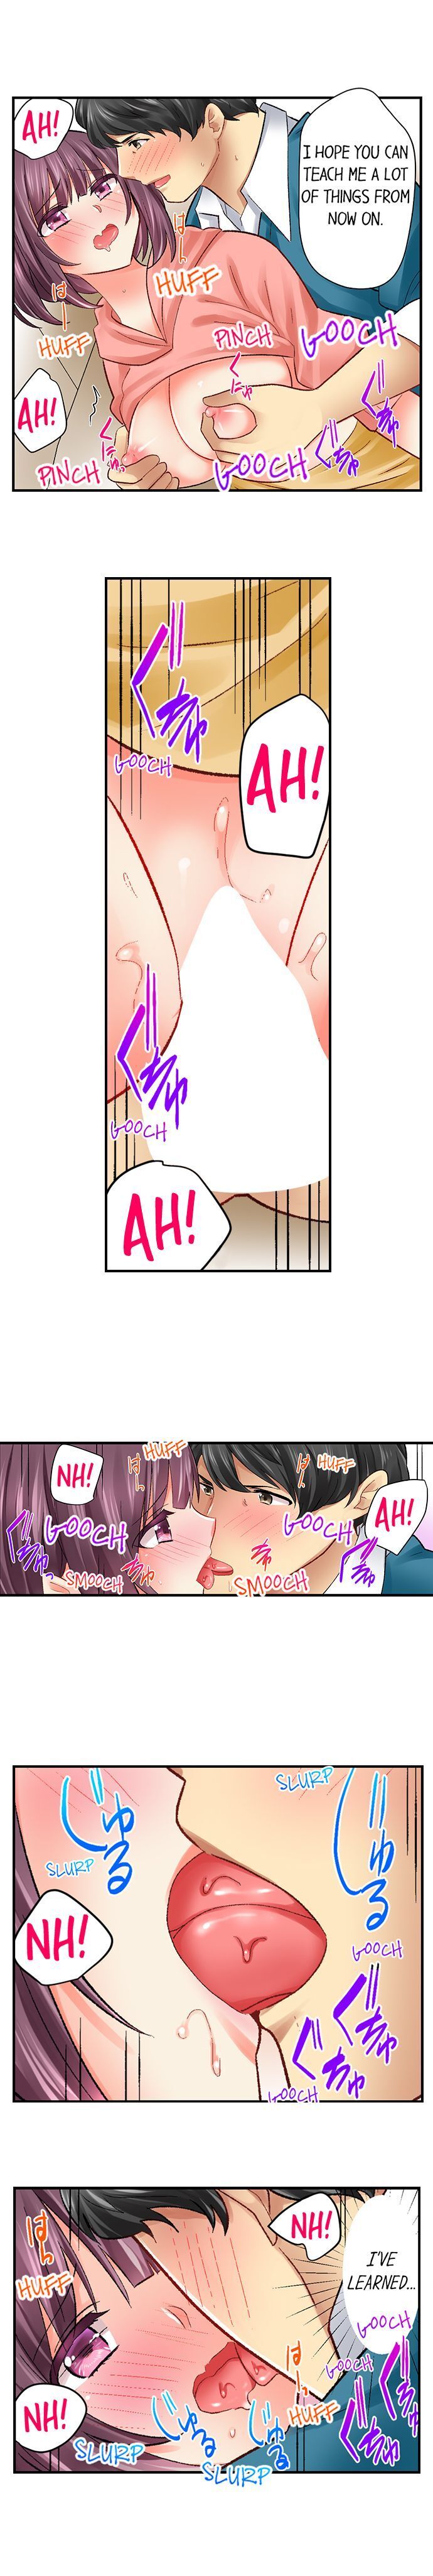 Our Kinky Newlywed Life - Chapter 39 Page 5